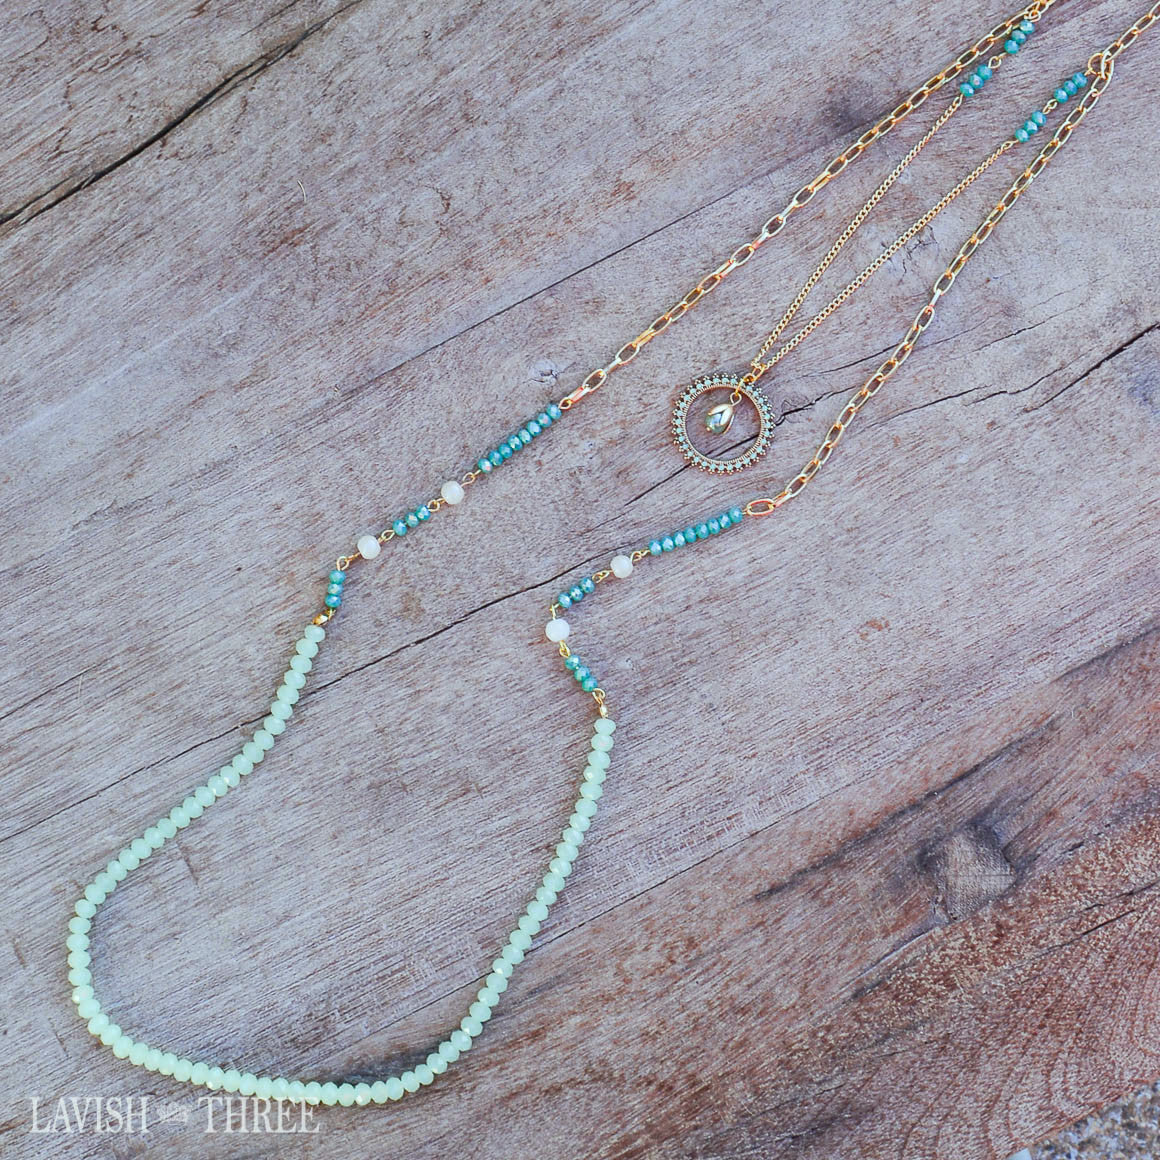 Gold chain necklace with blue and green beads and pendant